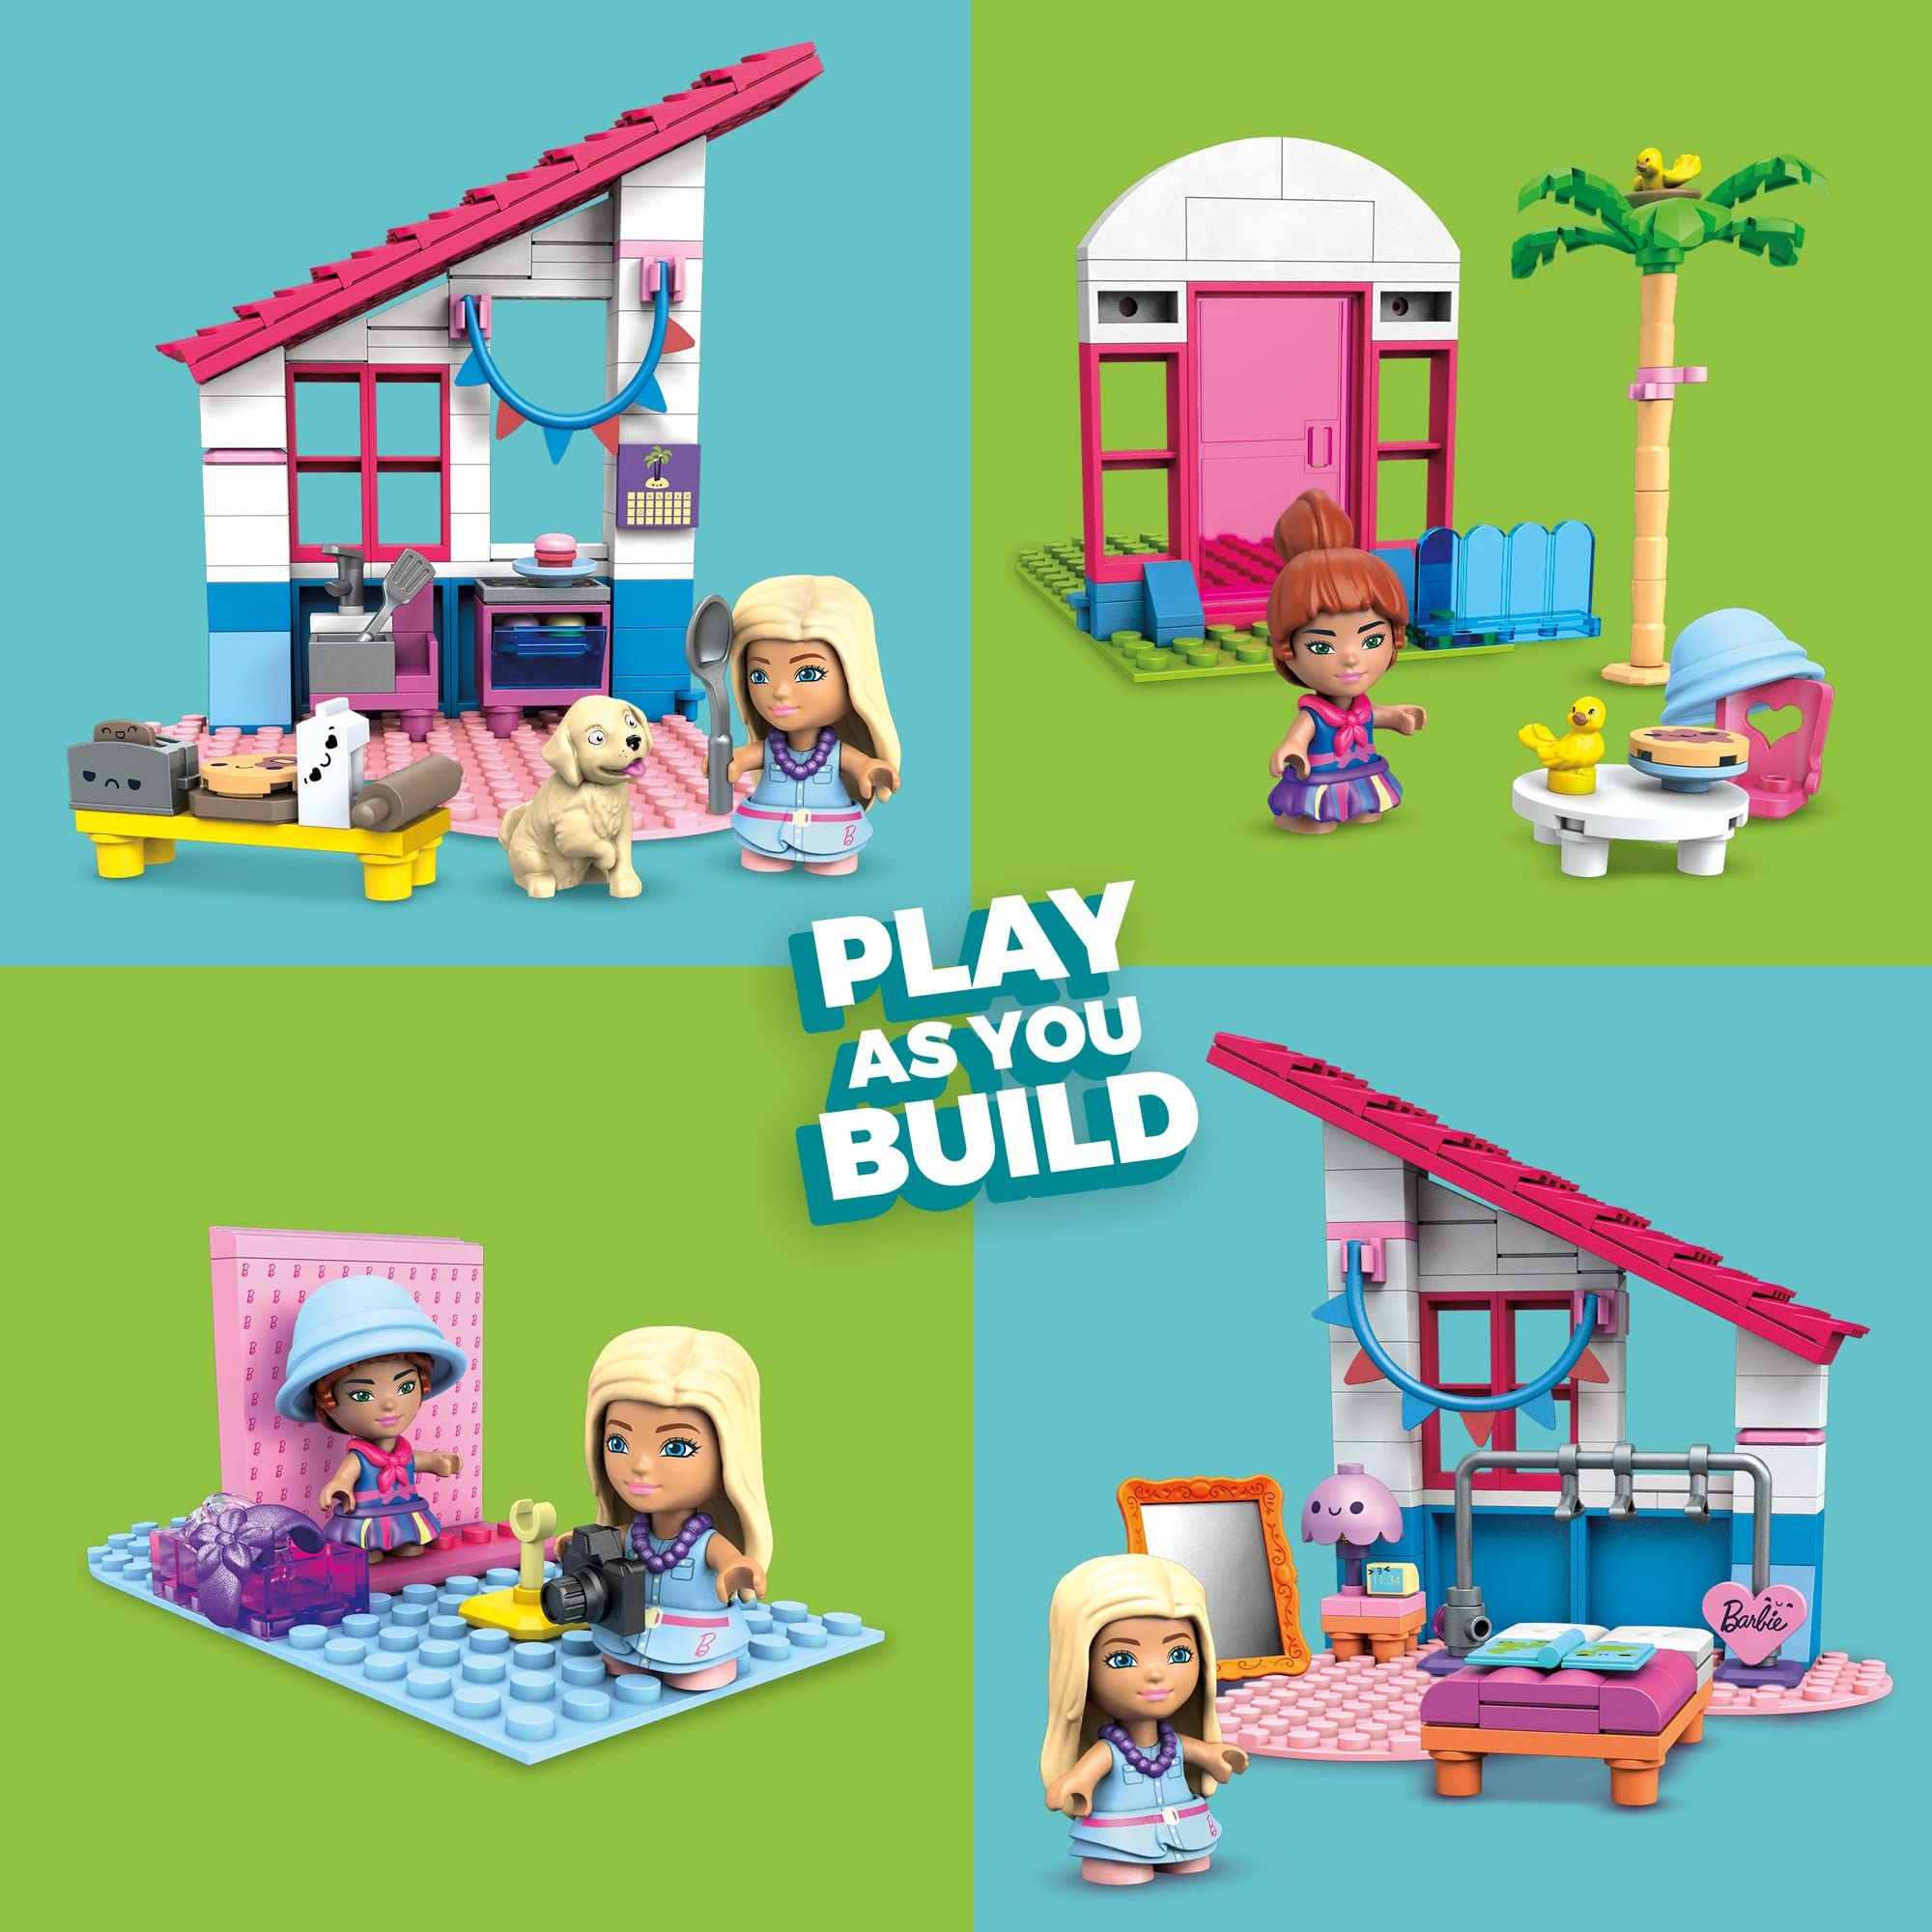 Mega Barbie Malibu Building Sets Bundle, 440 Bricks and Pieces with Fashion and Roleplay Accessories, 7 Micro-Dolls, 1 Puppy, 2 Birds and 2 Turtles, Toy Gift Set for Ages 4 and up